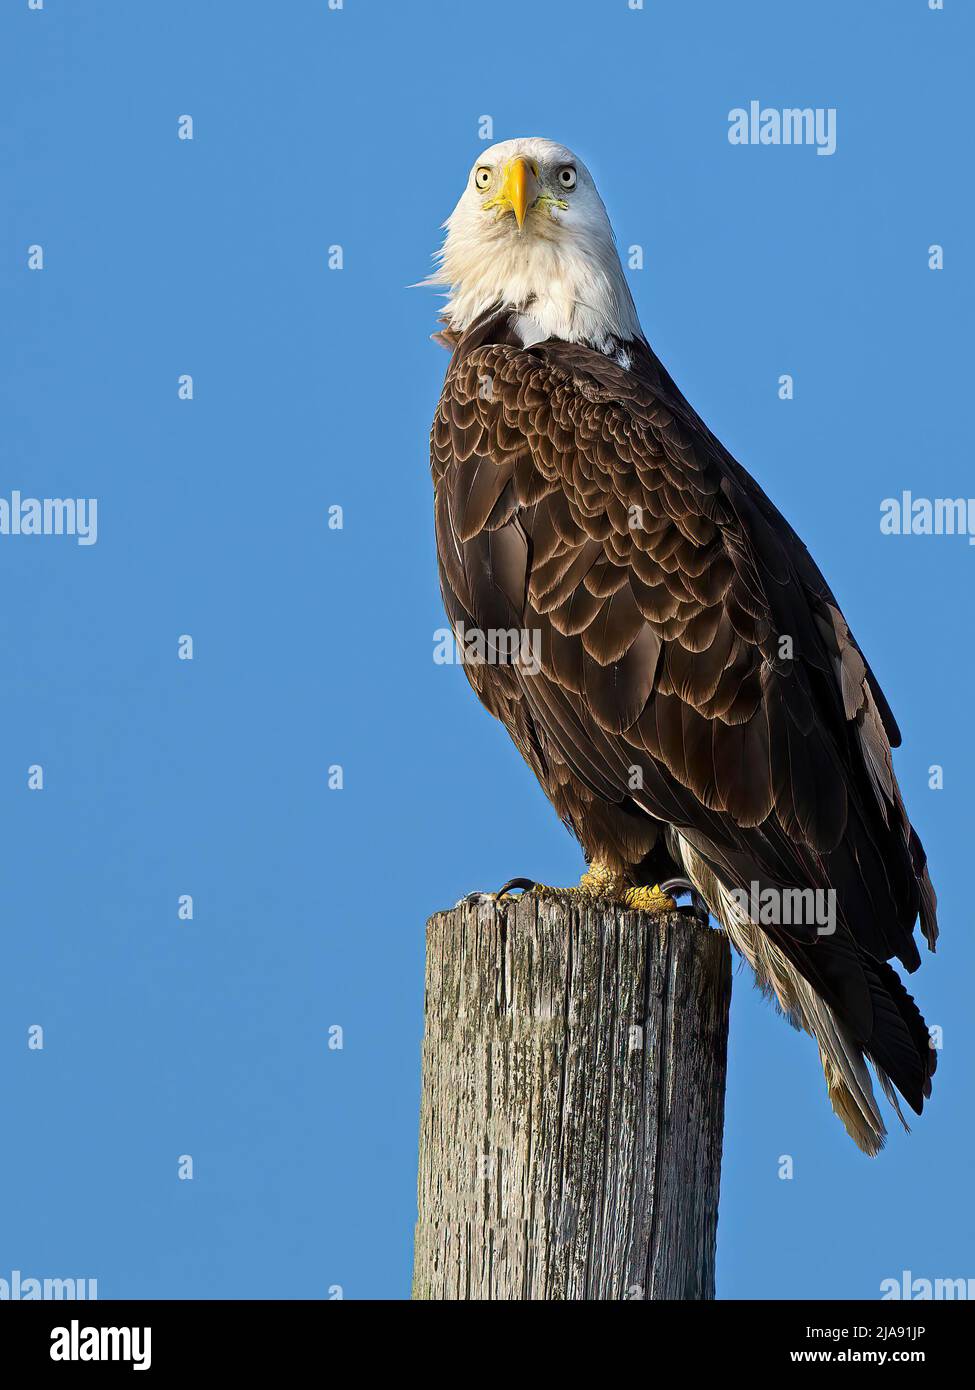 A Bald Eagle Standing on a Wood Piling Stock Photo